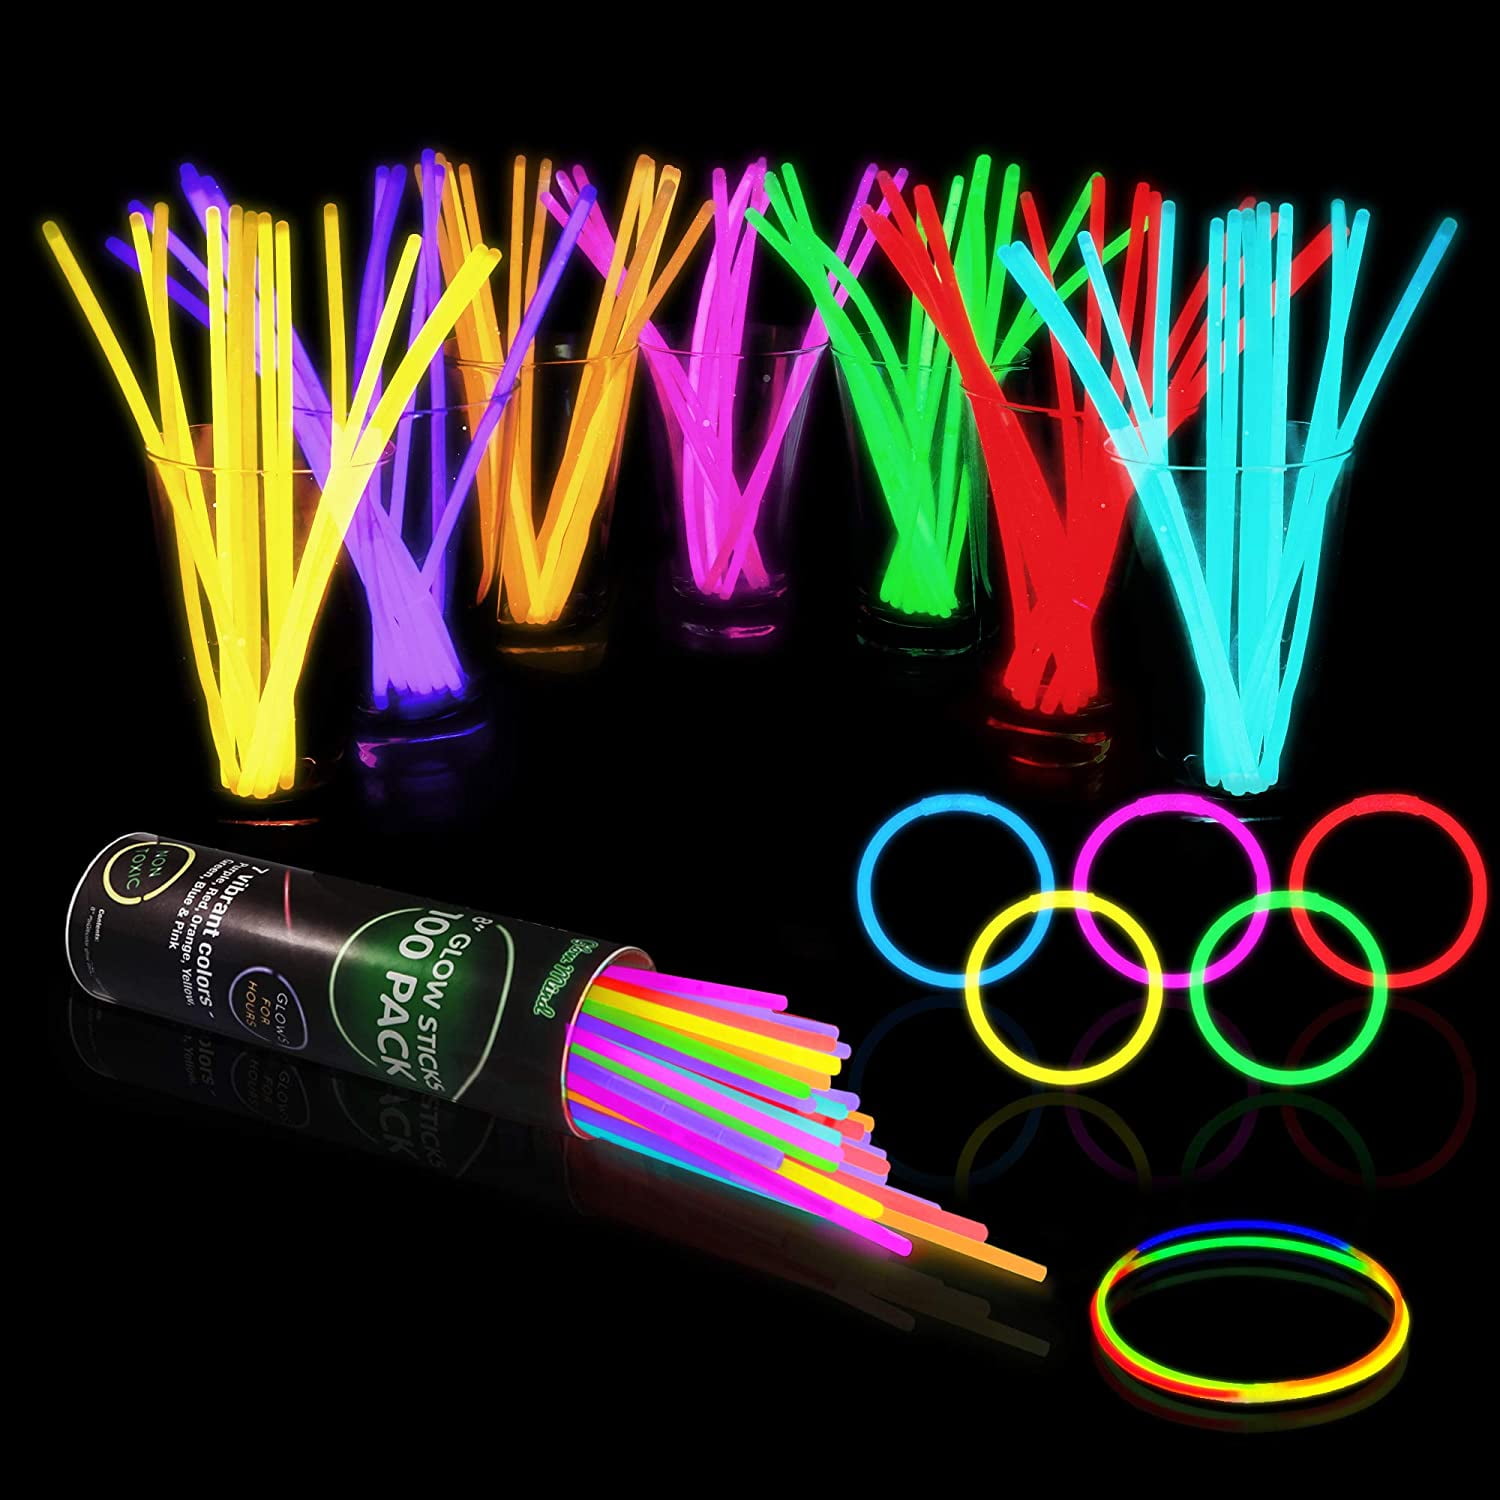 100 Premium Glow Sticks Party Pack 8 inch with Connectors to make Neon Bracelets 